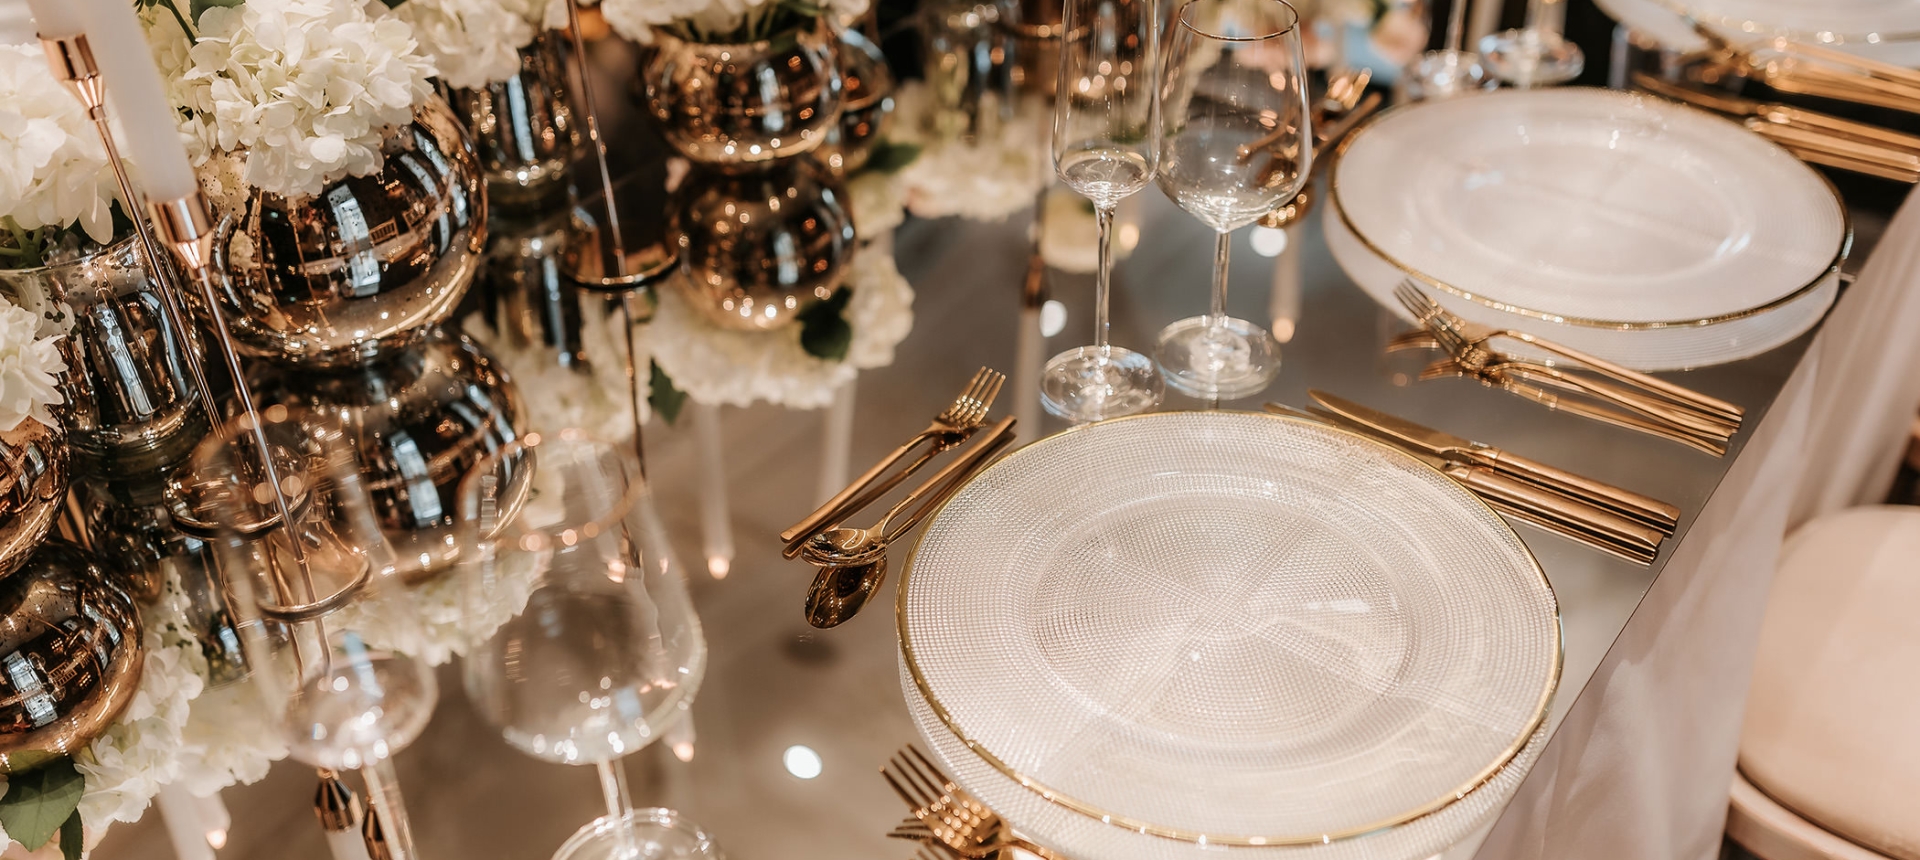 elegant dining arrangement with gold silverware paired with flowers and candles on the center of the table